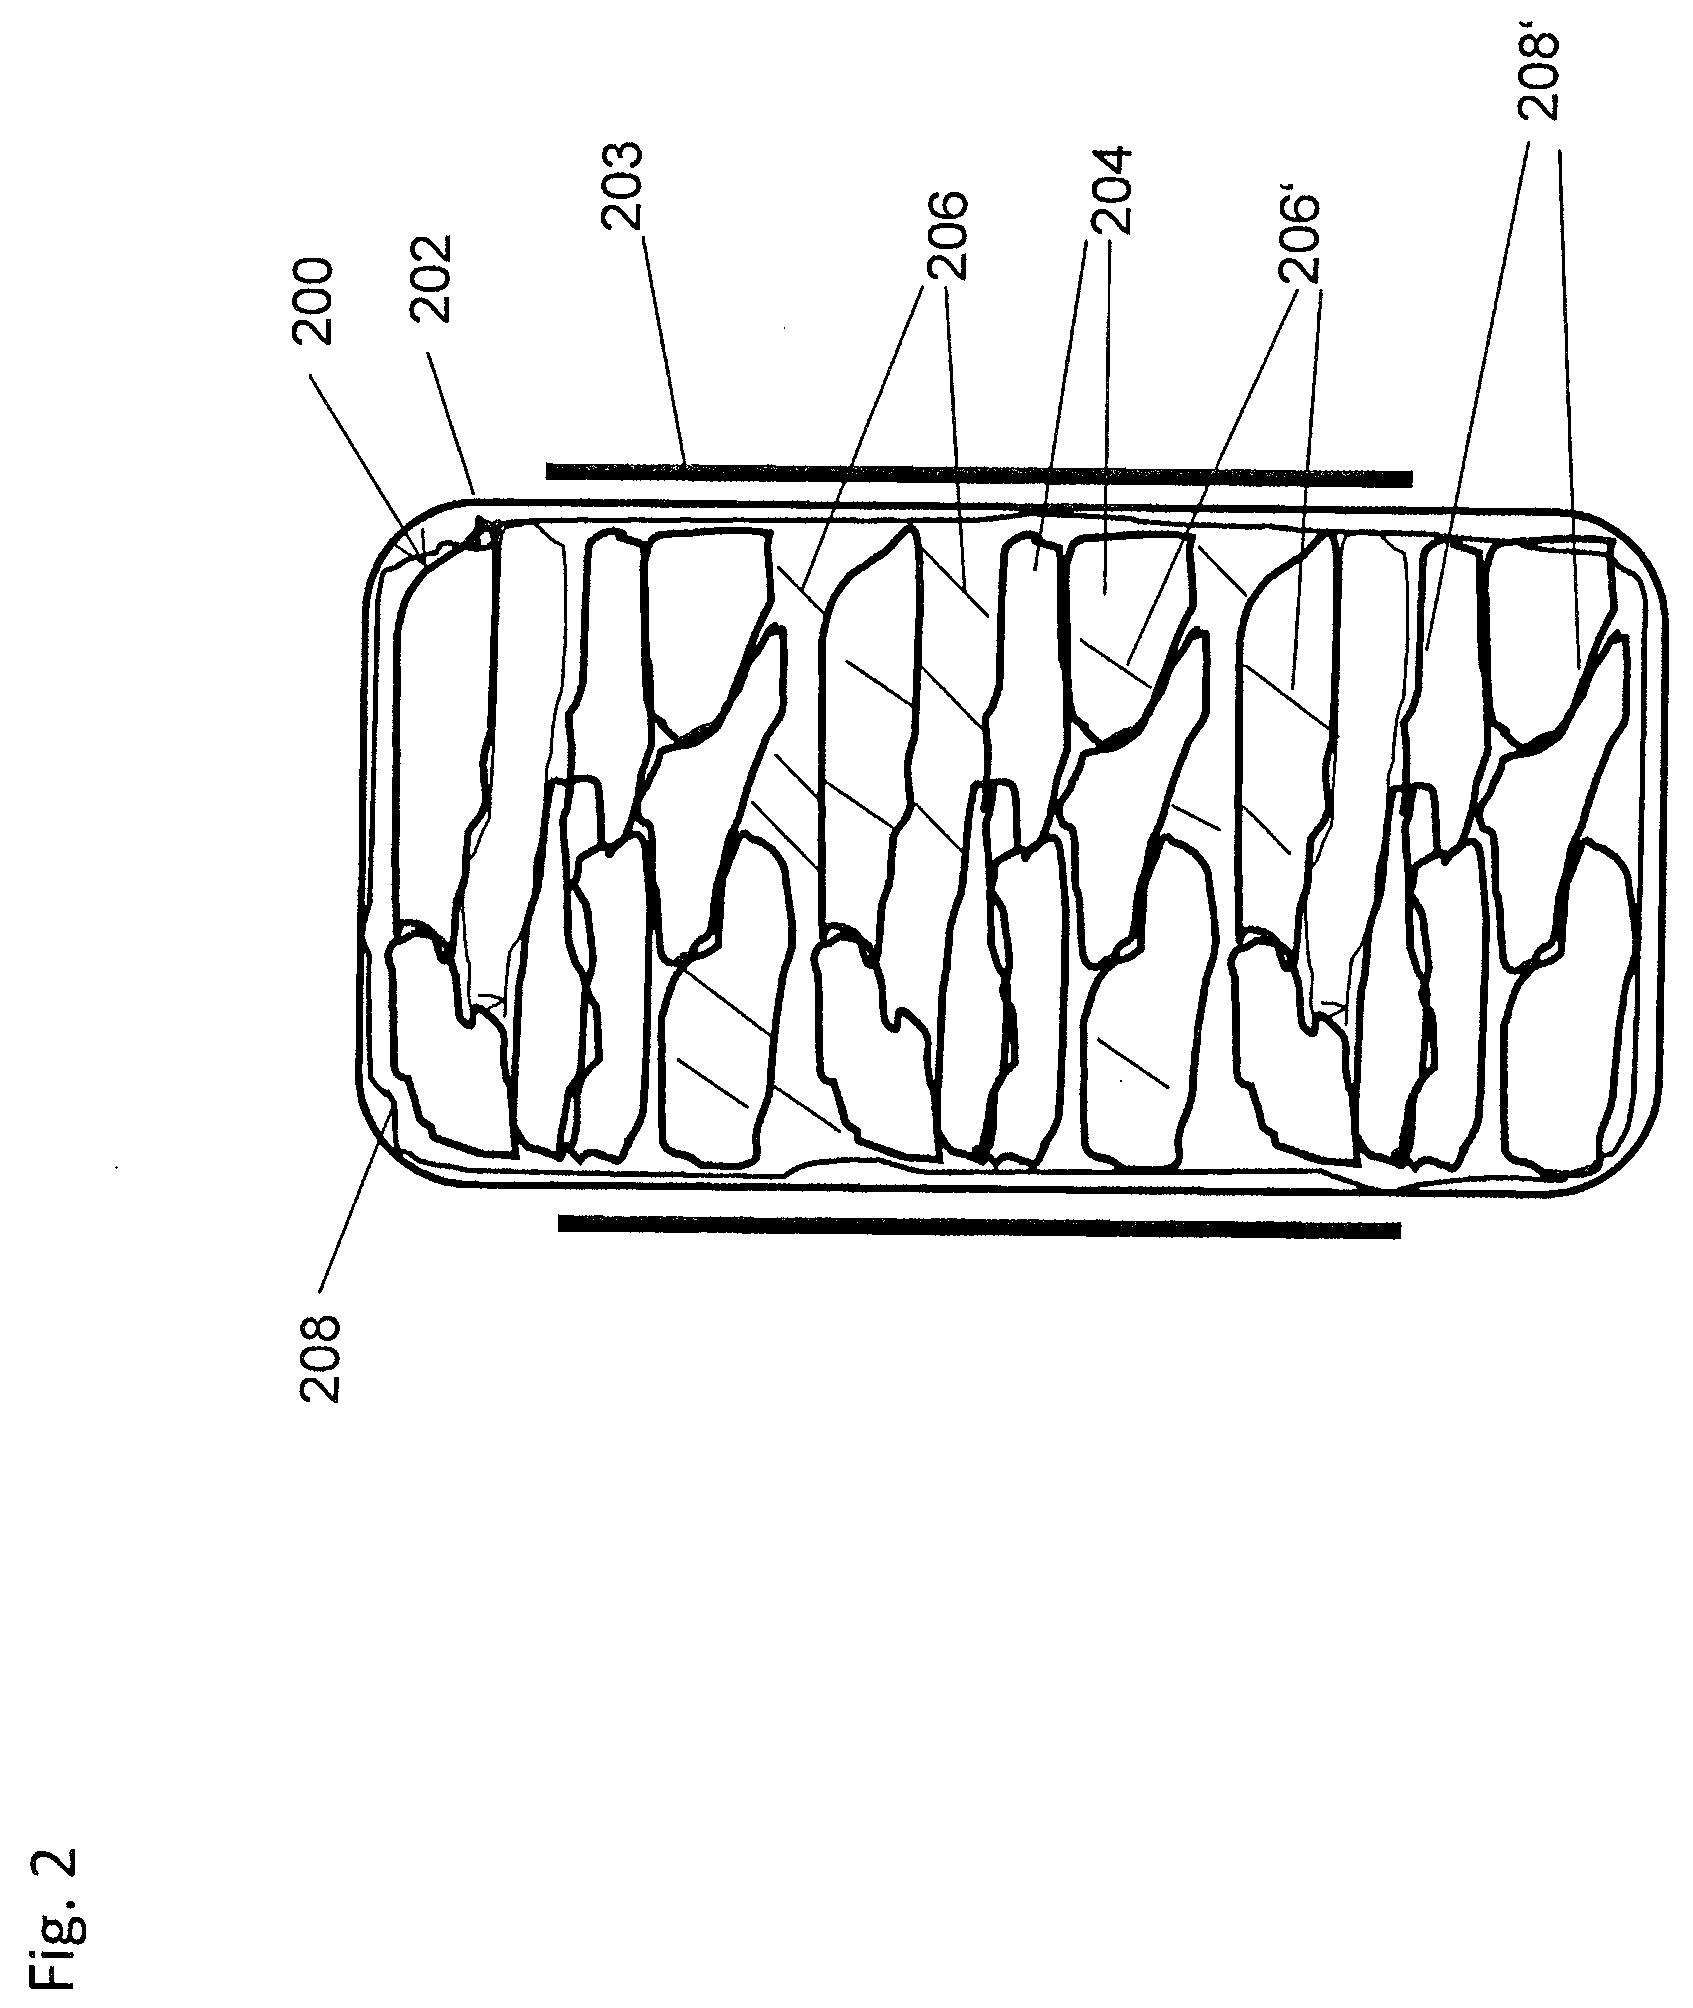 Connected heat conducting structures in solid ammonia storage systems